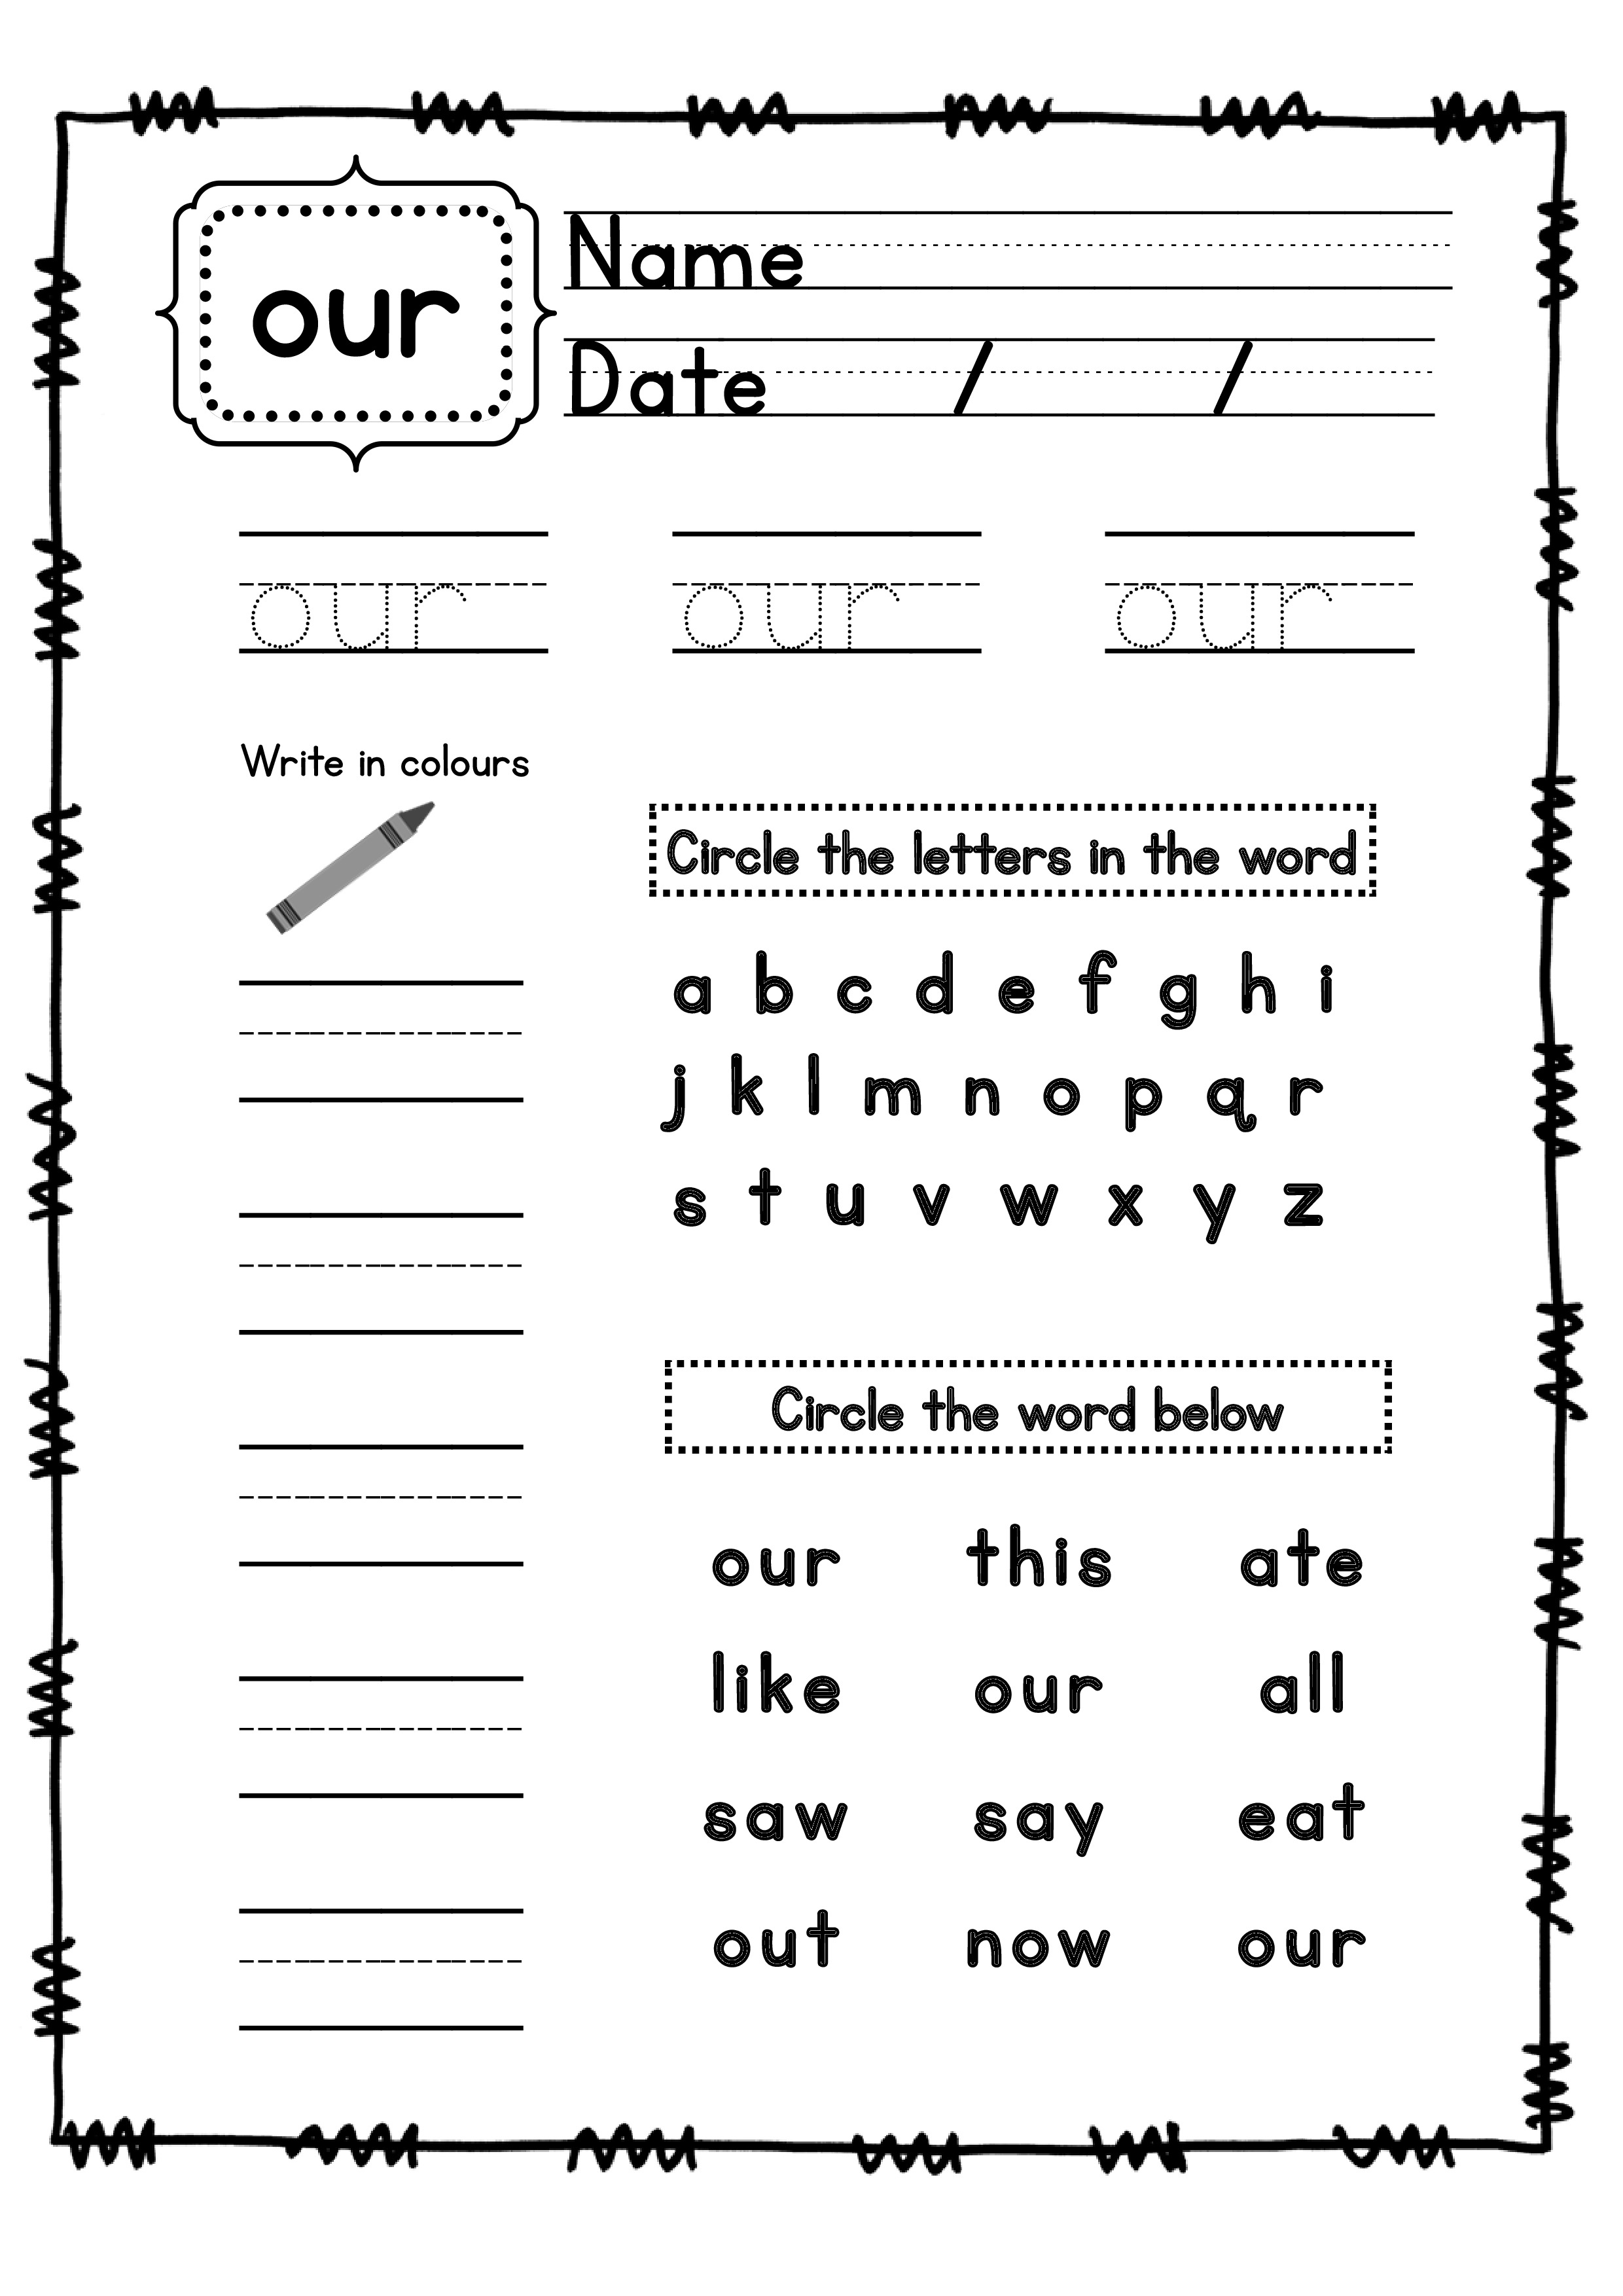 sight worksheets primer sight words worksheet word word includes 52 on word pdf  all the the very